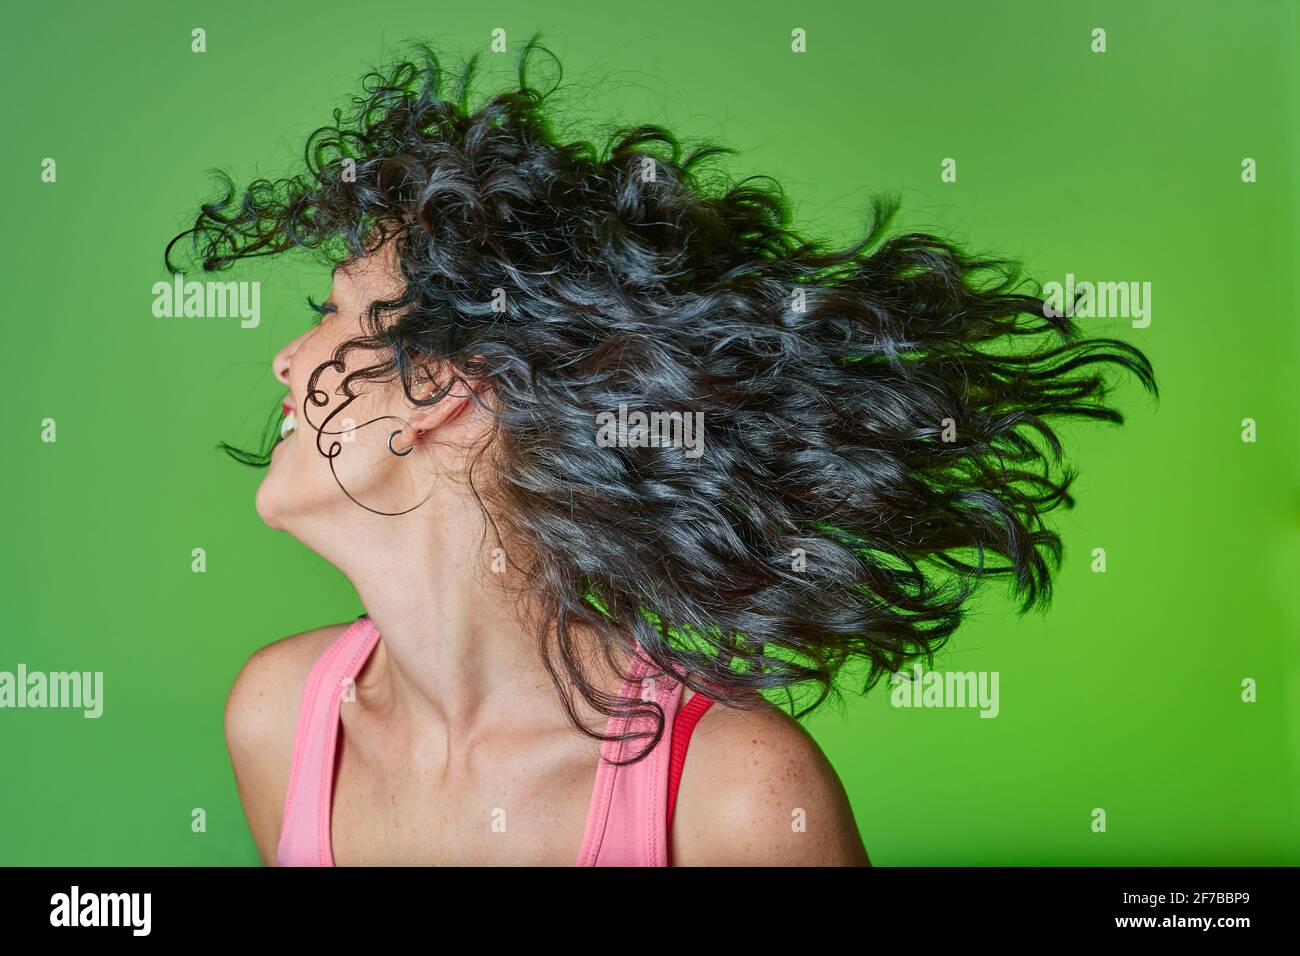 smiling young woman with curly black hair following curly girl method for caring for her curls and hair. hair care concept. green background. Stock Photo